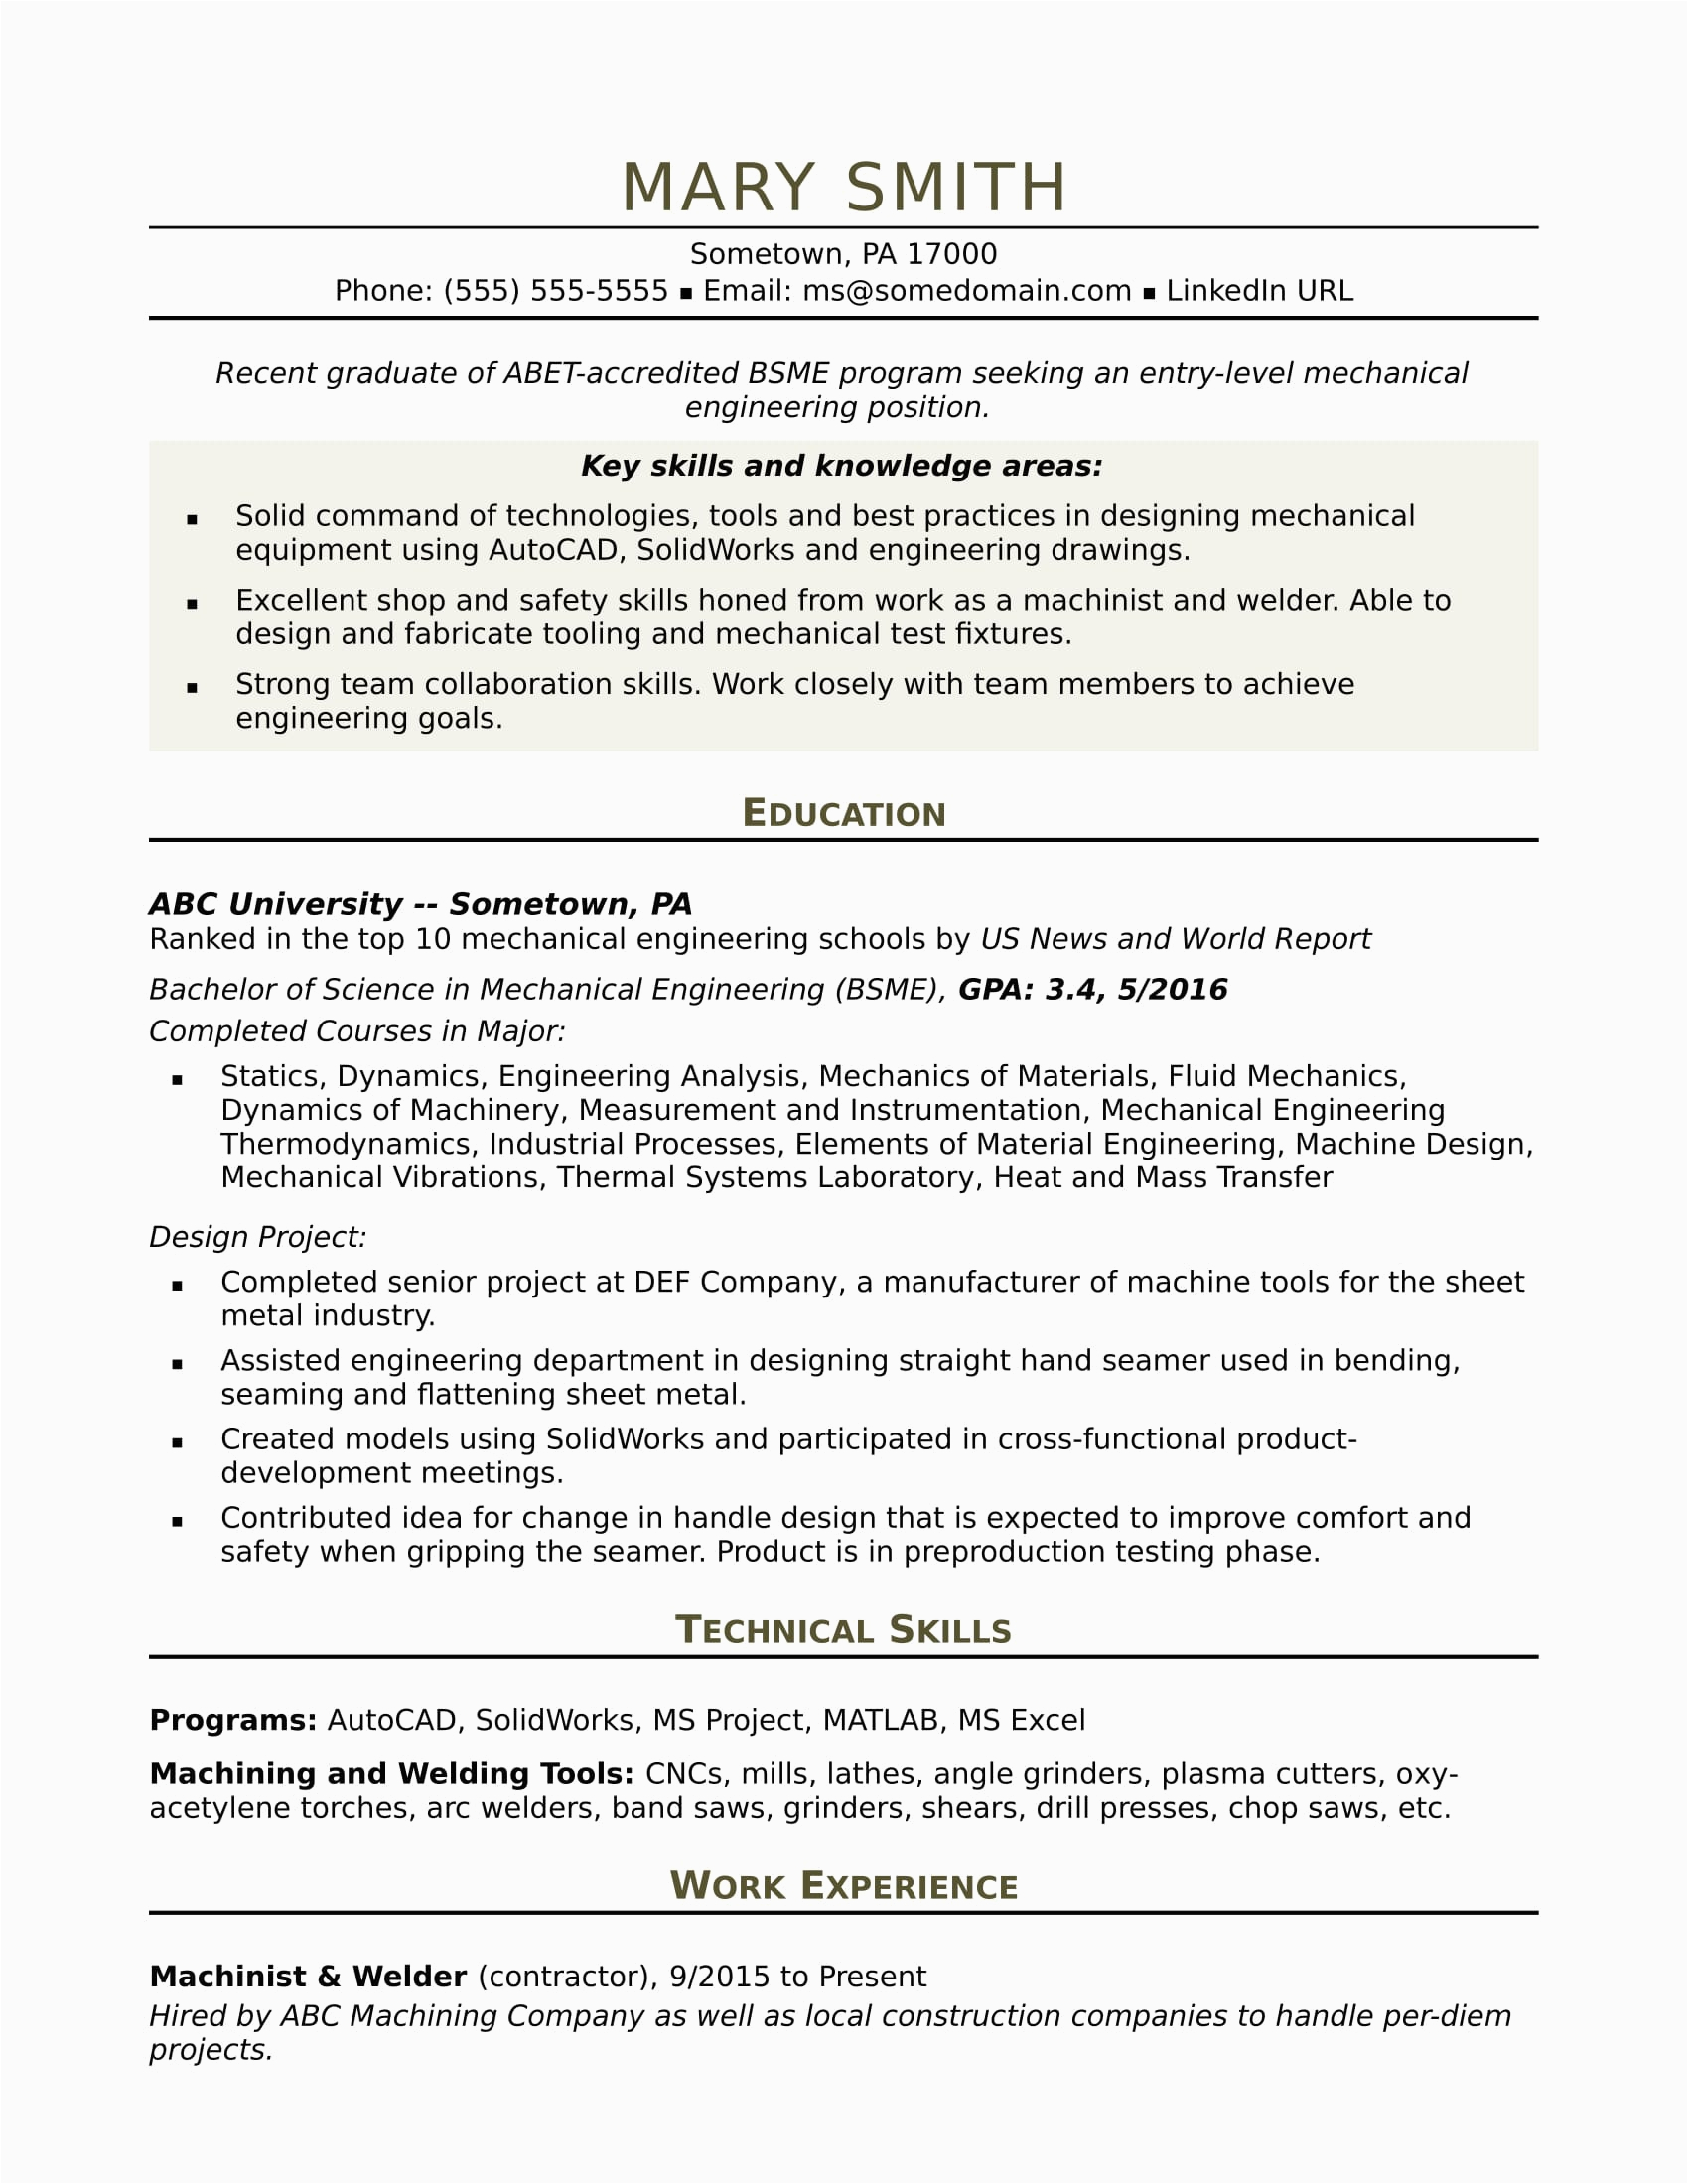 Experience Resume Sample for Mechanical Engineer Sample Resume for An Entry Level Mechanical Engineer